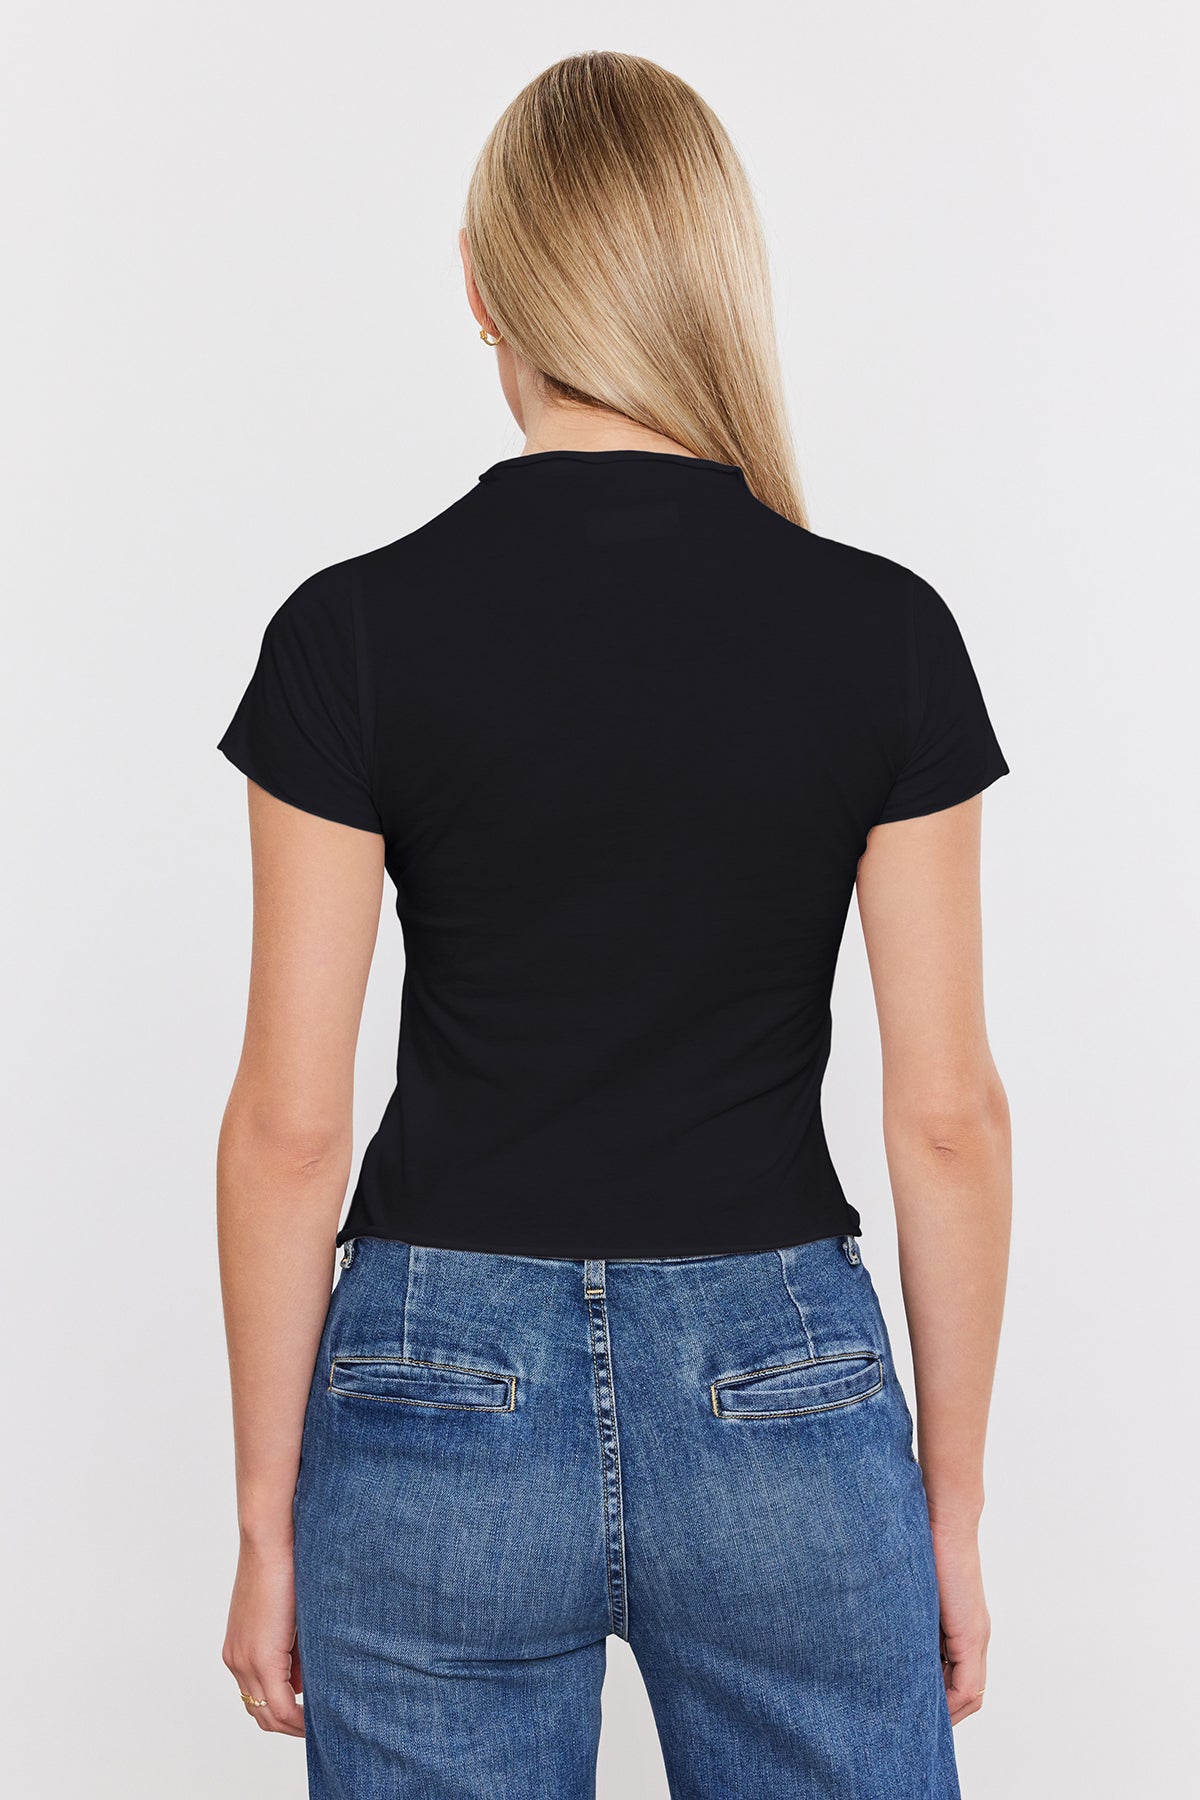 Woman viewed from behind wearing a black Velvet by Graham & Spencer JACKIE MOCK NECK TEE and blue jeans, standing against a white background.-36909390627009